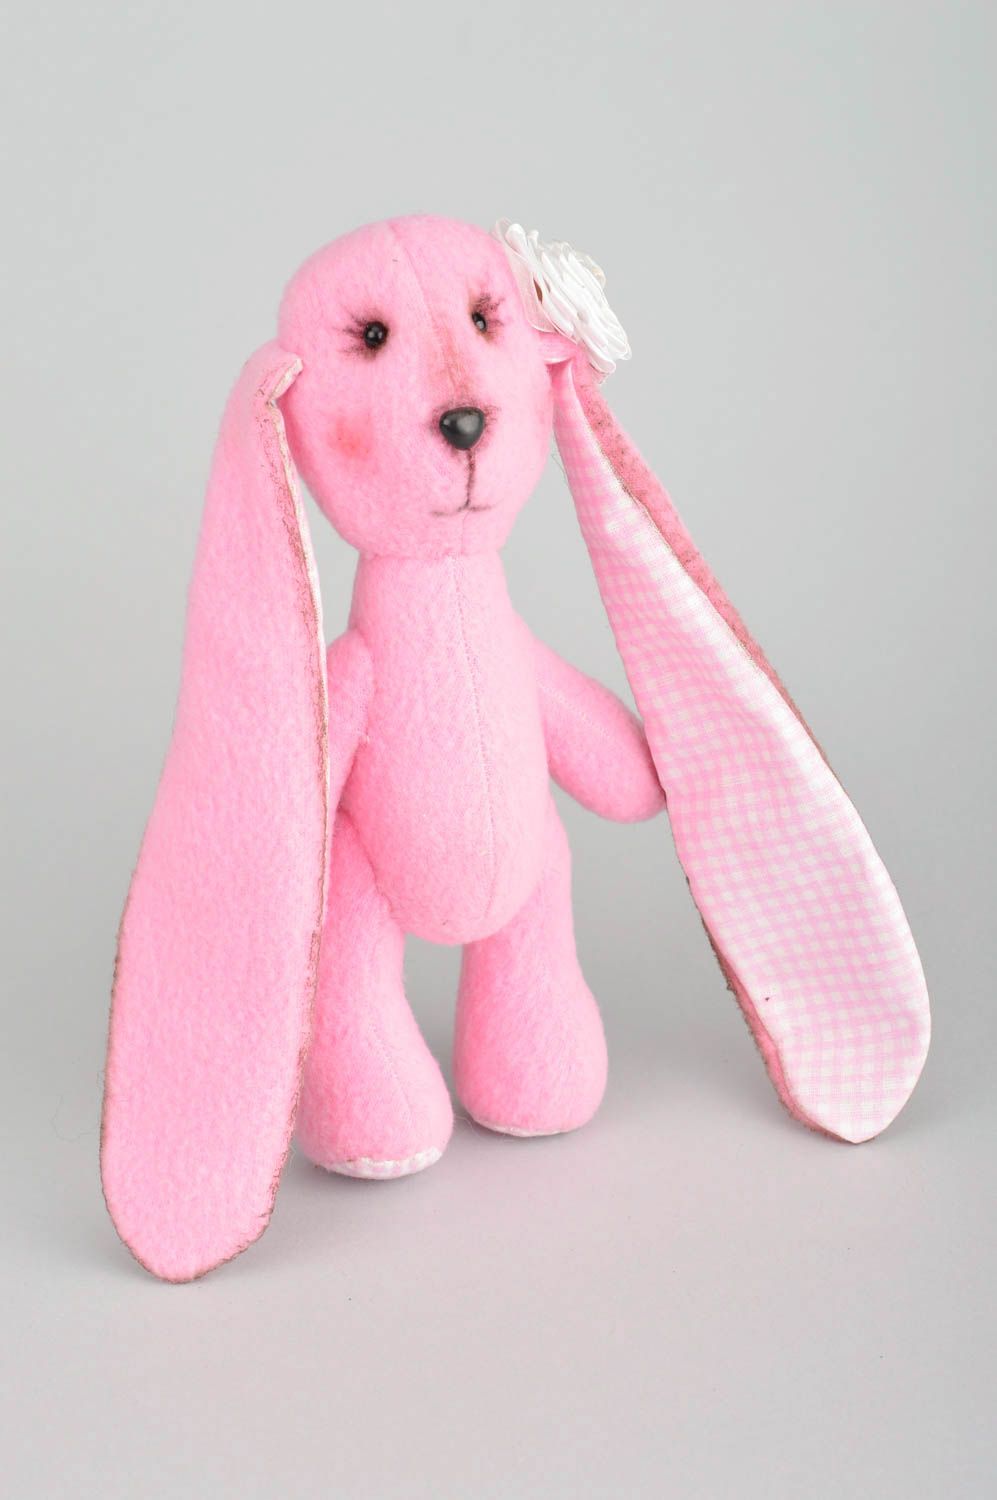 Handmade designer soft toy sewn of fleece and cotton pink rabbit with long ears photo 2